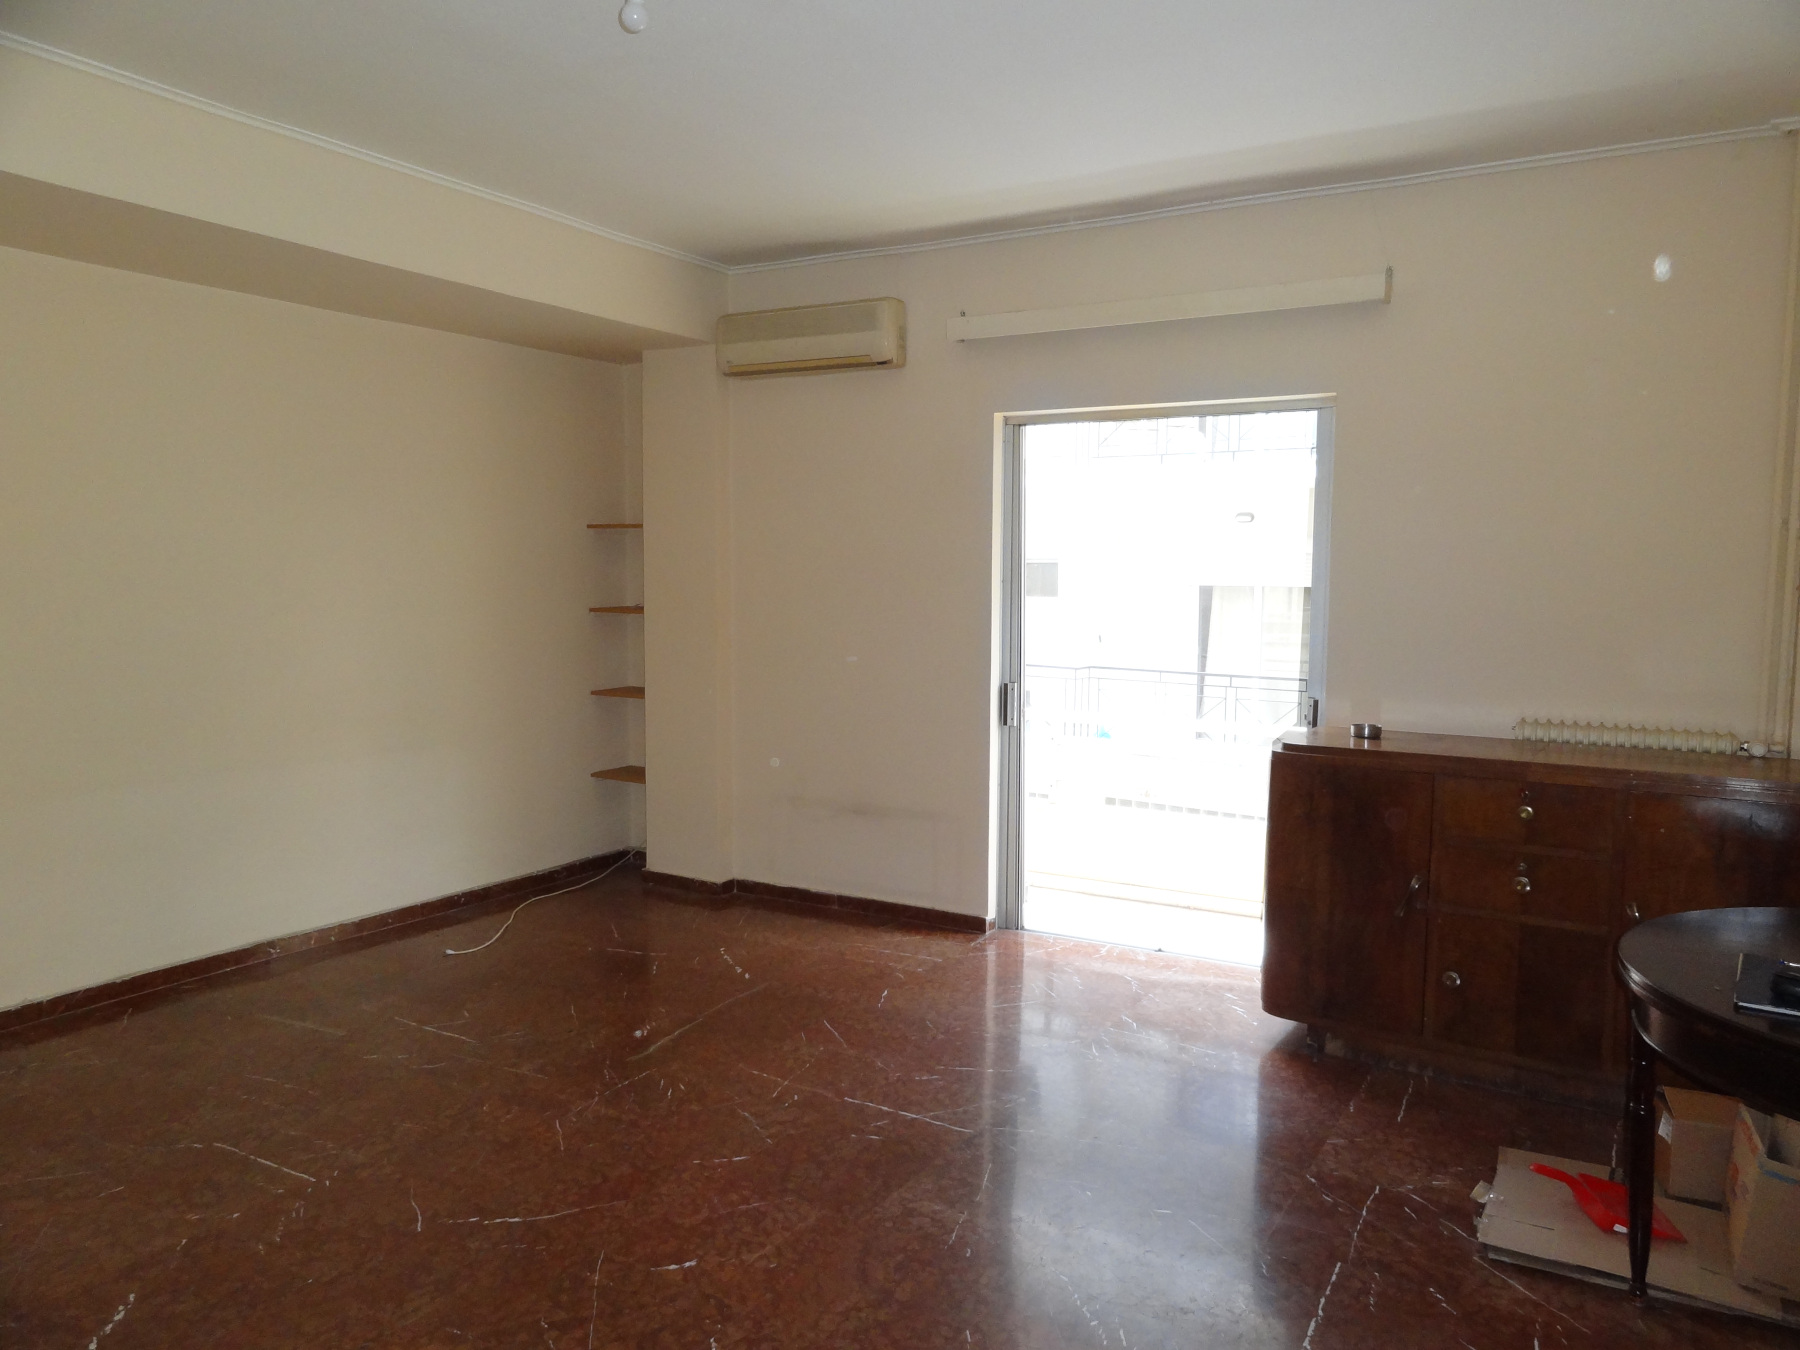 Bright 2 bedrooms apartment for rent, 80 sq.m. 2nd floor in the center of Ioannina near the Courthouse